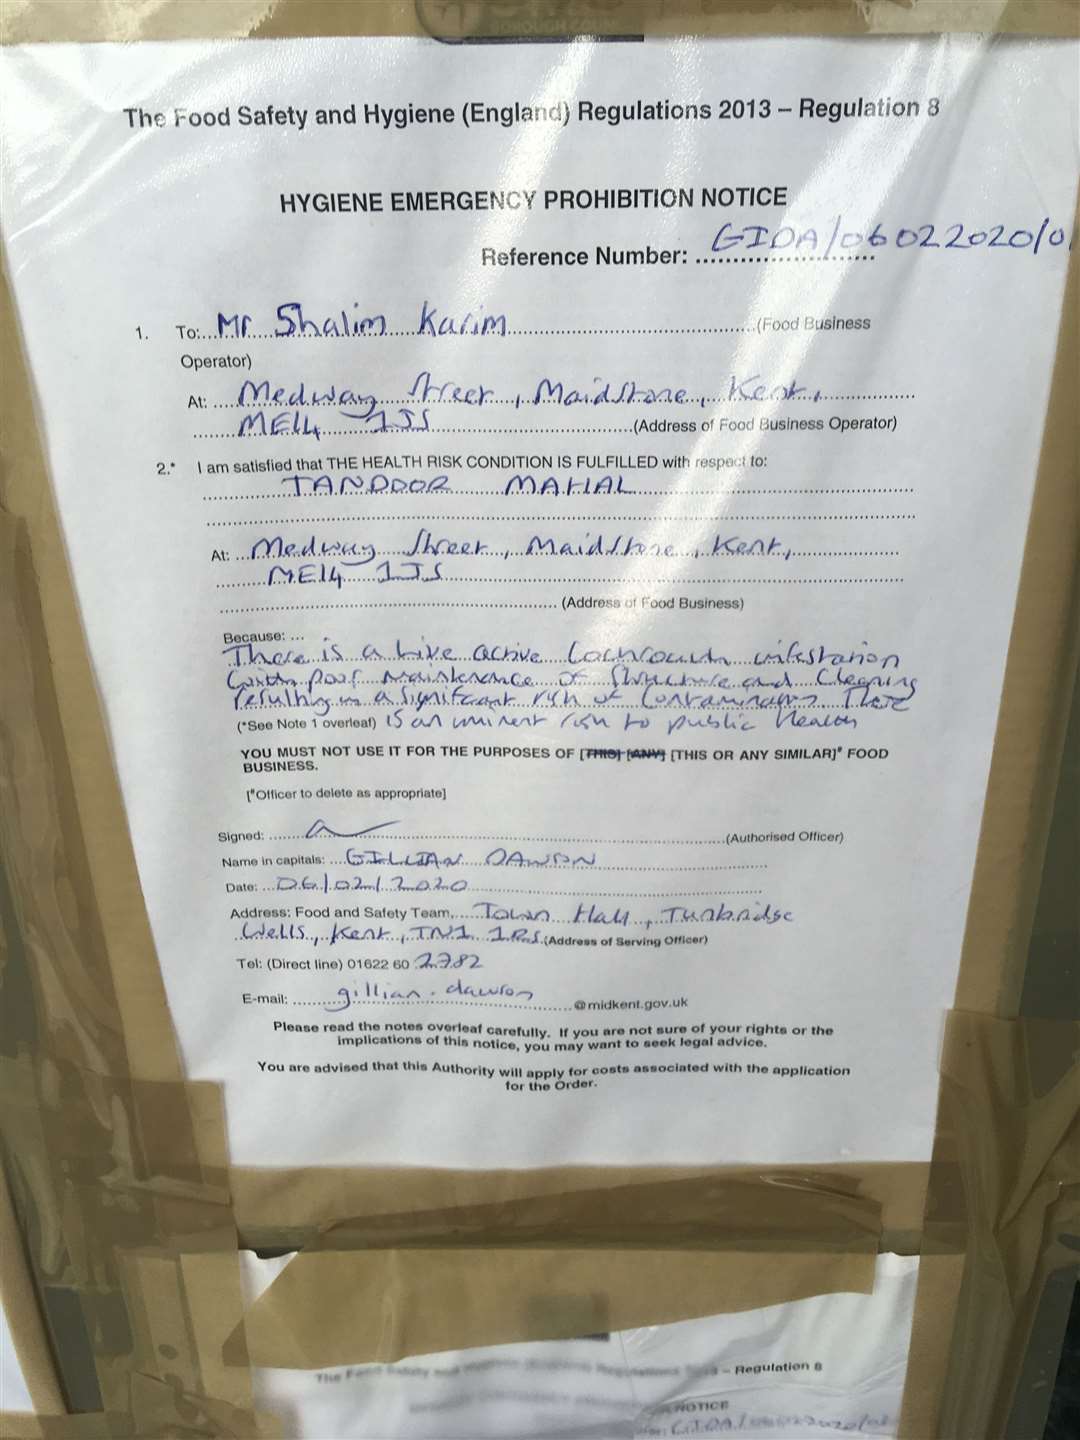 Tandoor Mahal in Medway Street, Maidstone was served with a hygiene emergency prohibition notice last week